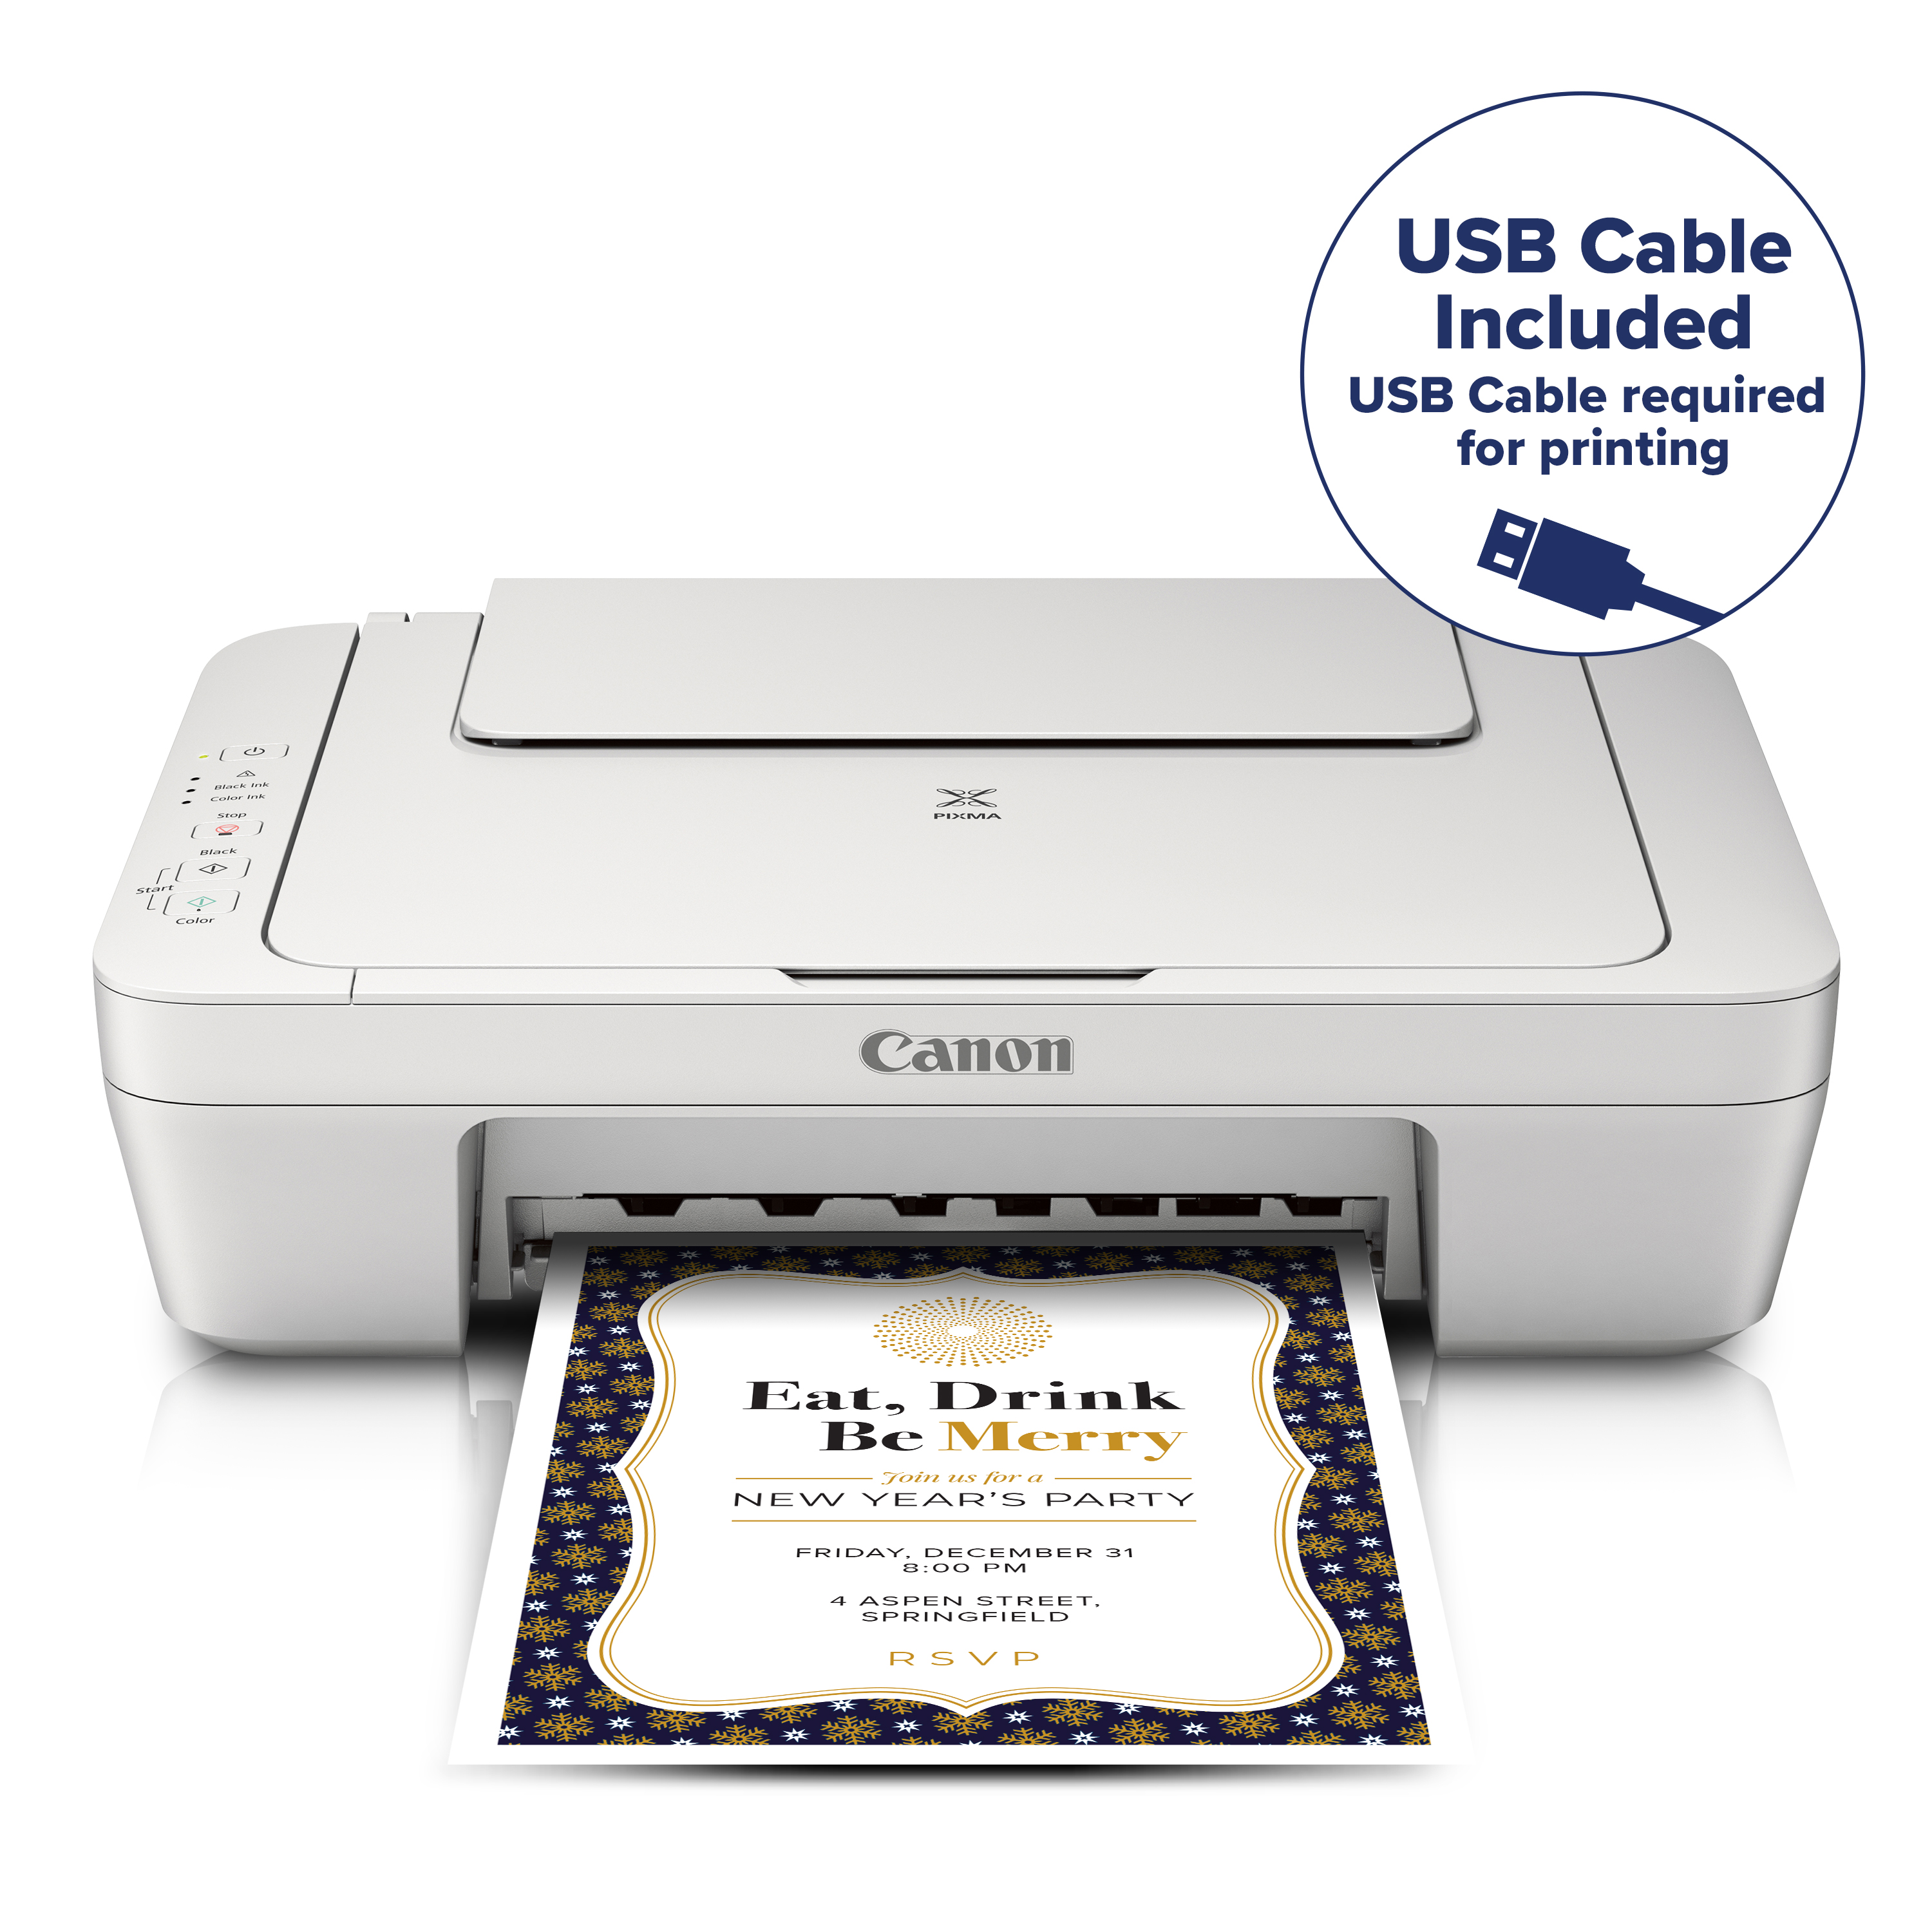 Canon PIXMA MG2522 Wired All-in-One Color Inkjet Printer [USB Cable Included], White - image 1 of 6